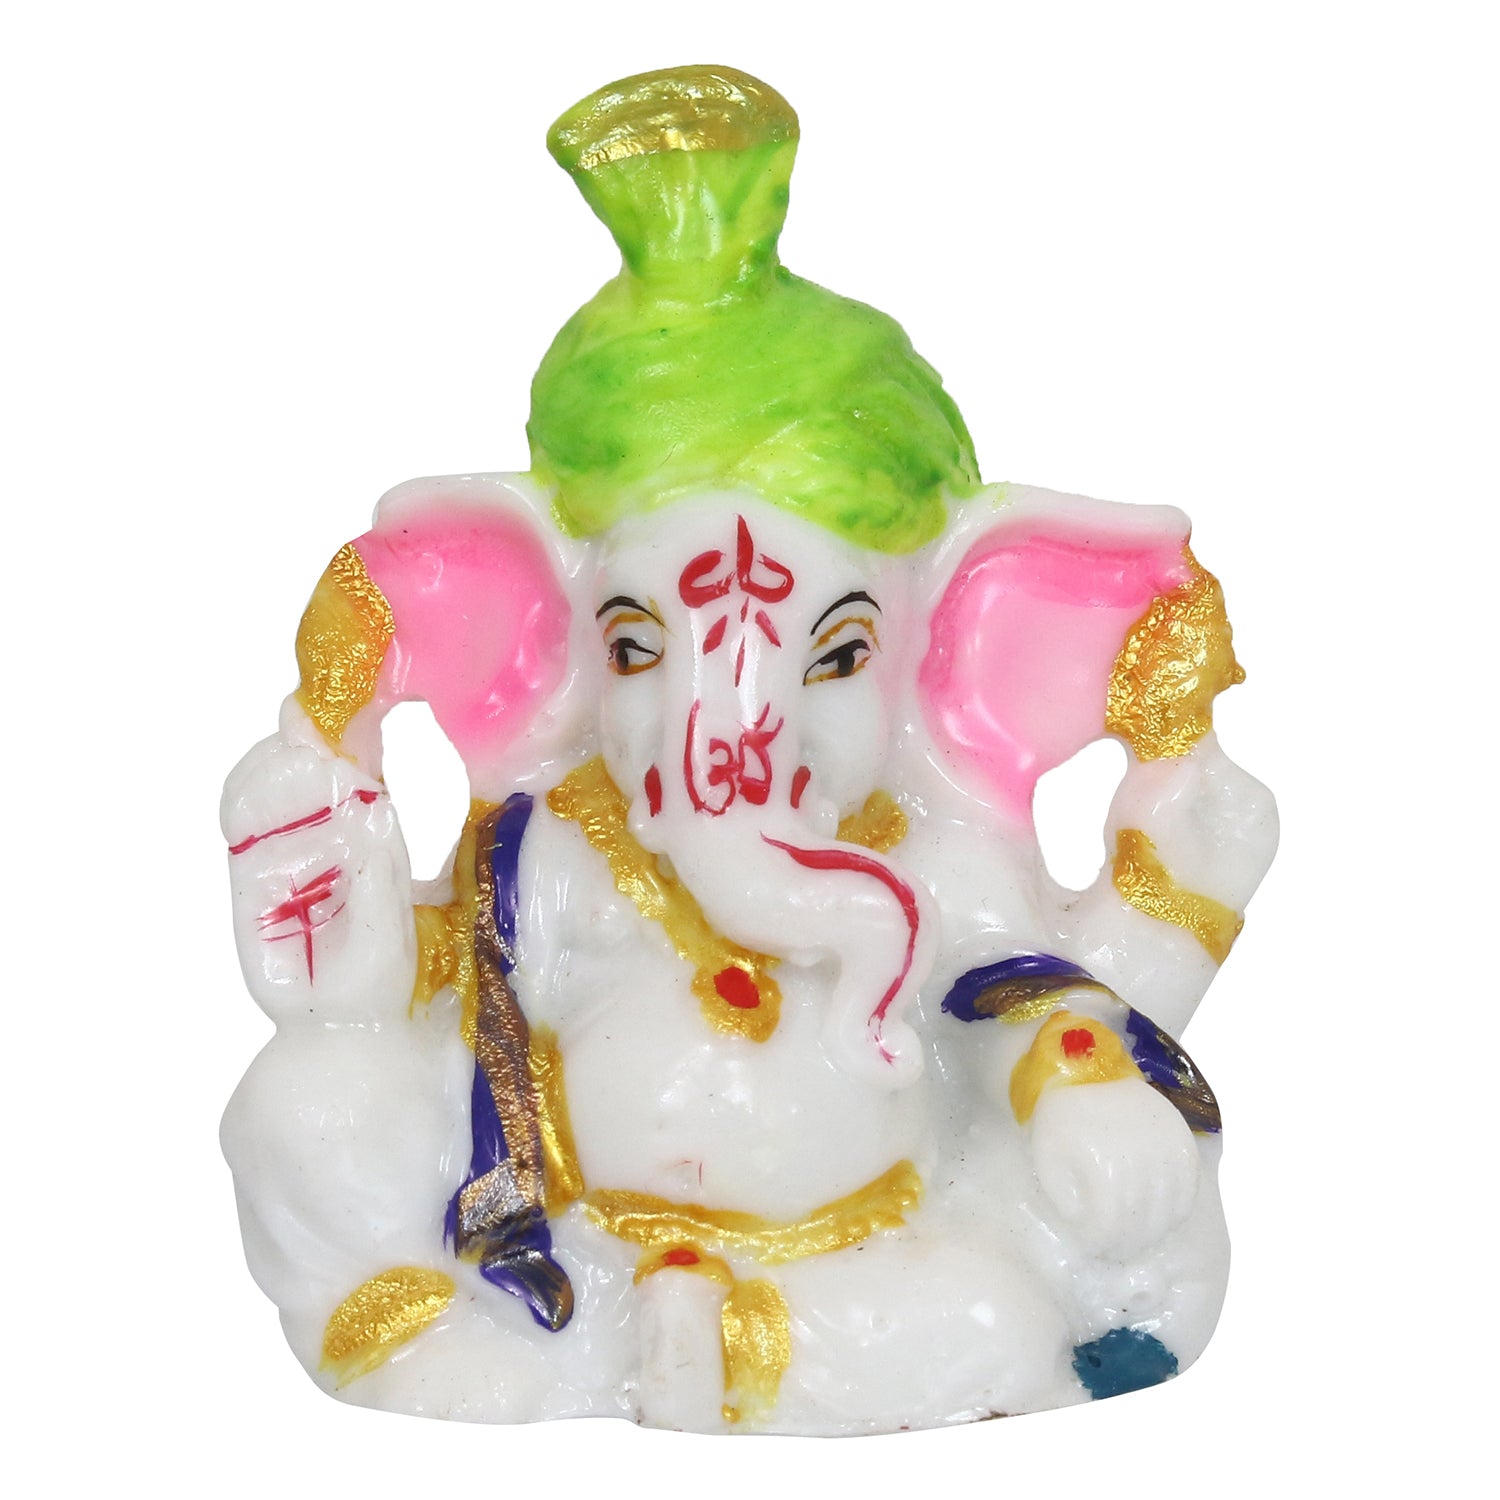 Decorative Lord Ganesha Idol For Car Dashboard, Home Temple, And Office Desks 2